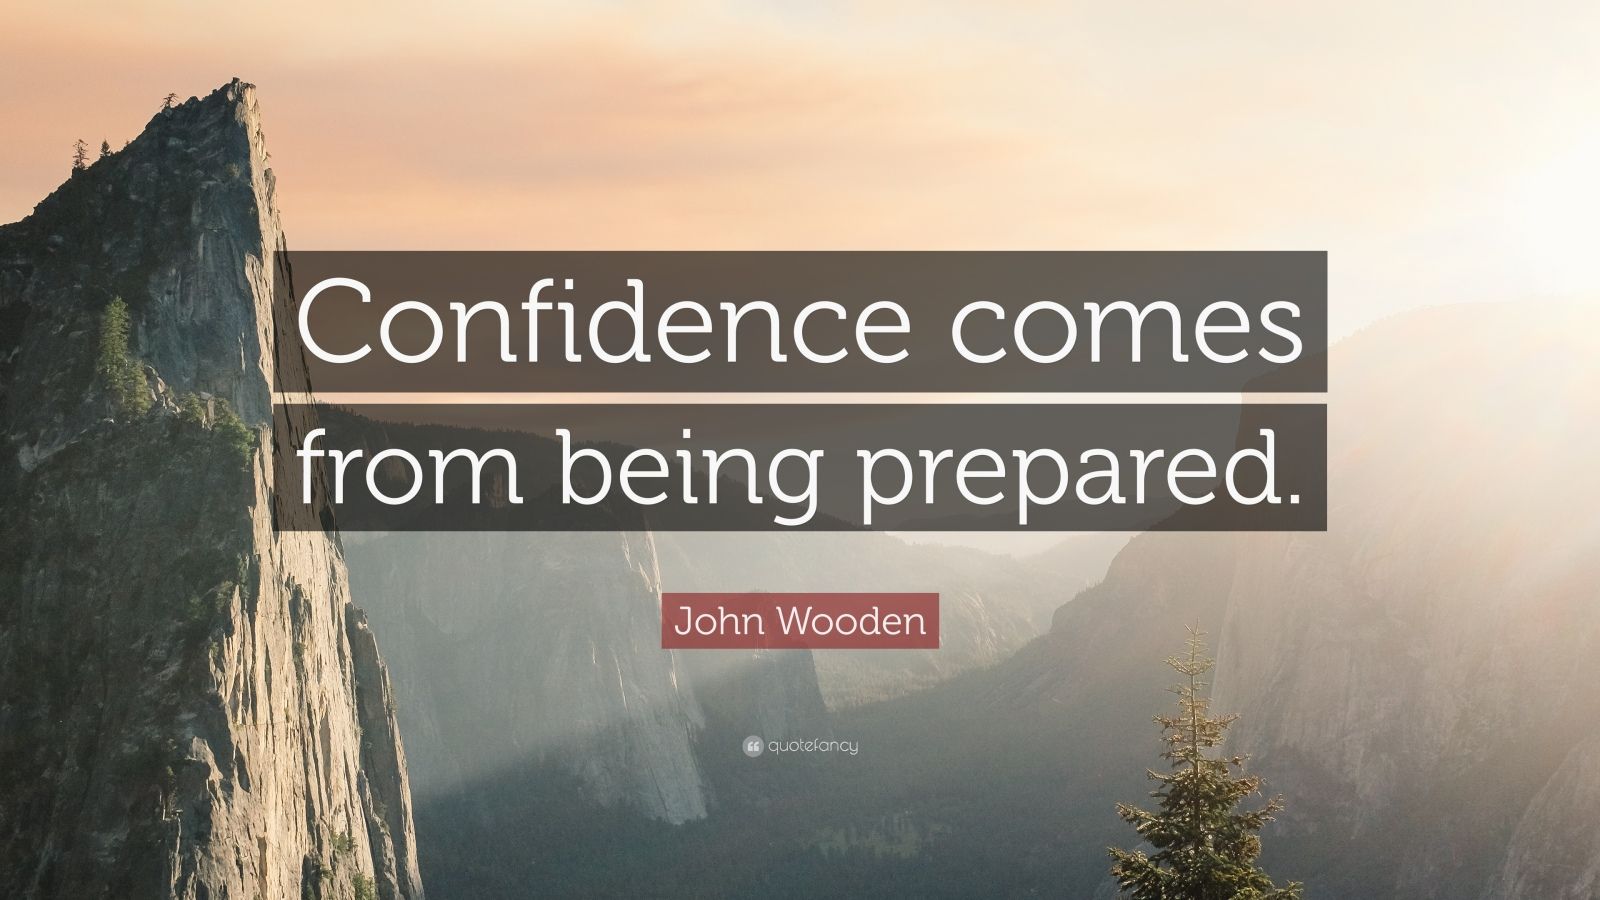 John Wooden Quote: “Confidence comes from being prepared.” (12